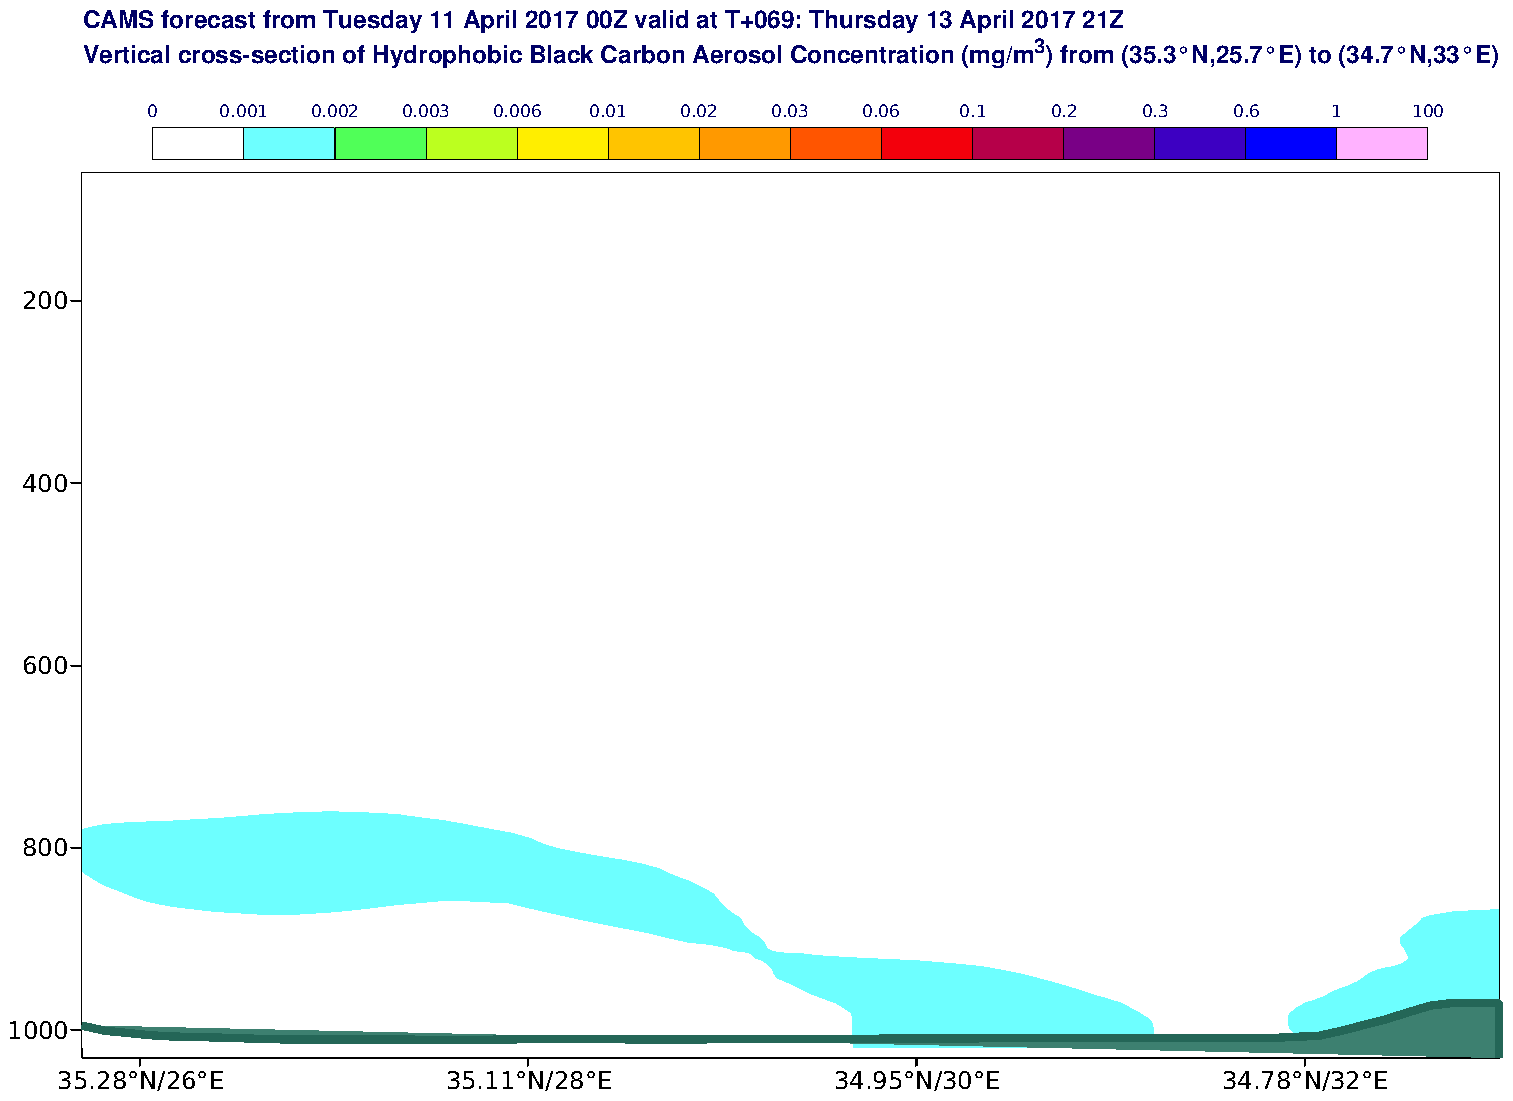 Vertical cross-section of Hydrophobic Black Carbon Aerosol Concentration (mg/m3) valid at T69 - 2017-04-13 21:00